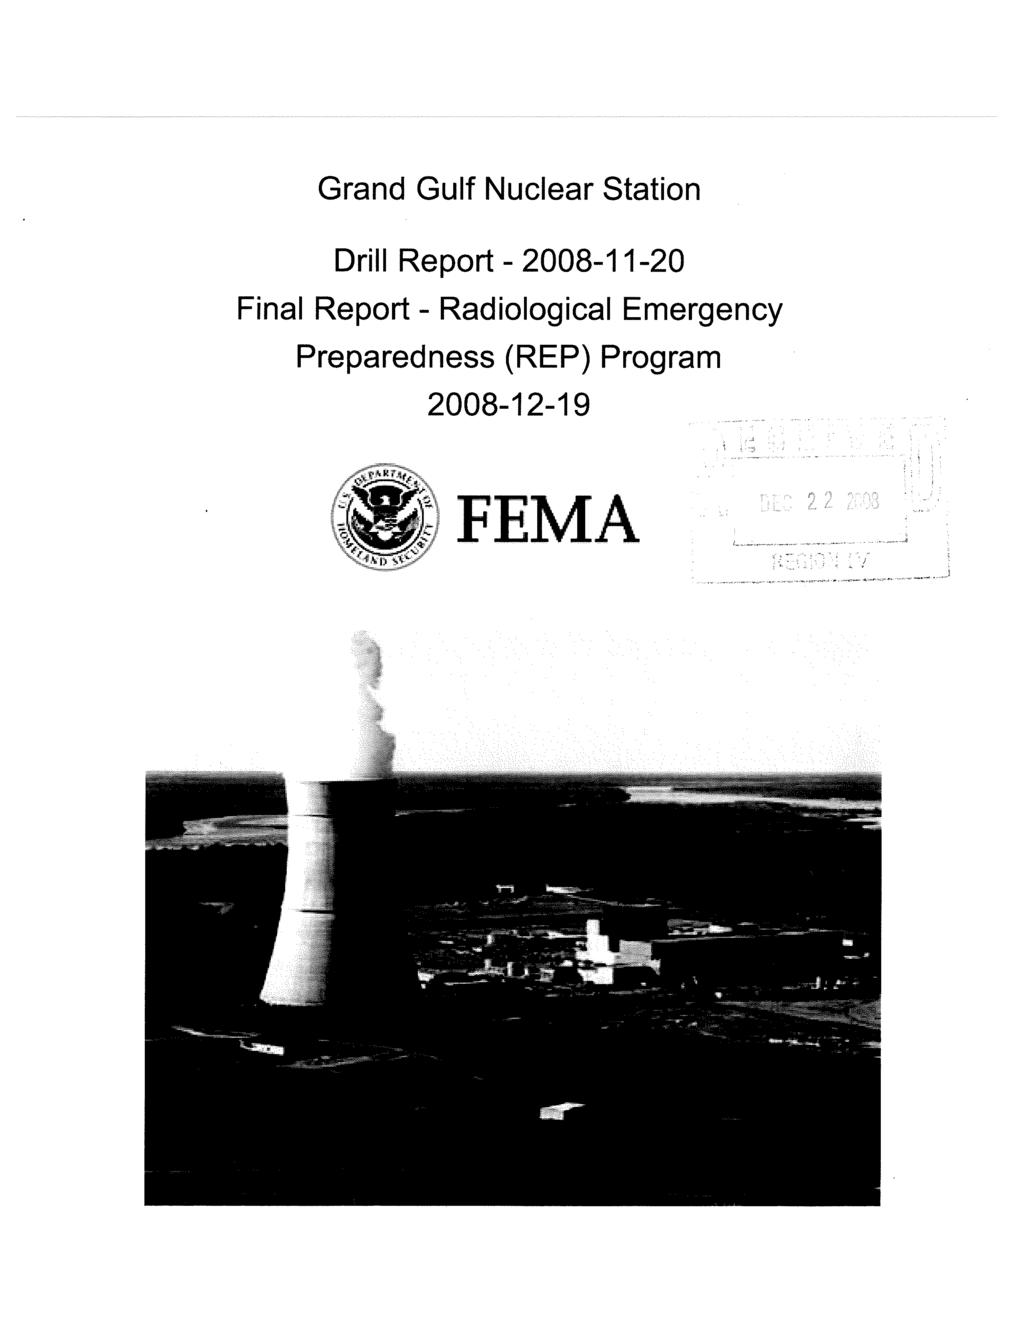 Grand Gulf Nuclear Station Drill Report- 2008-11-20 Final Report - Radiological